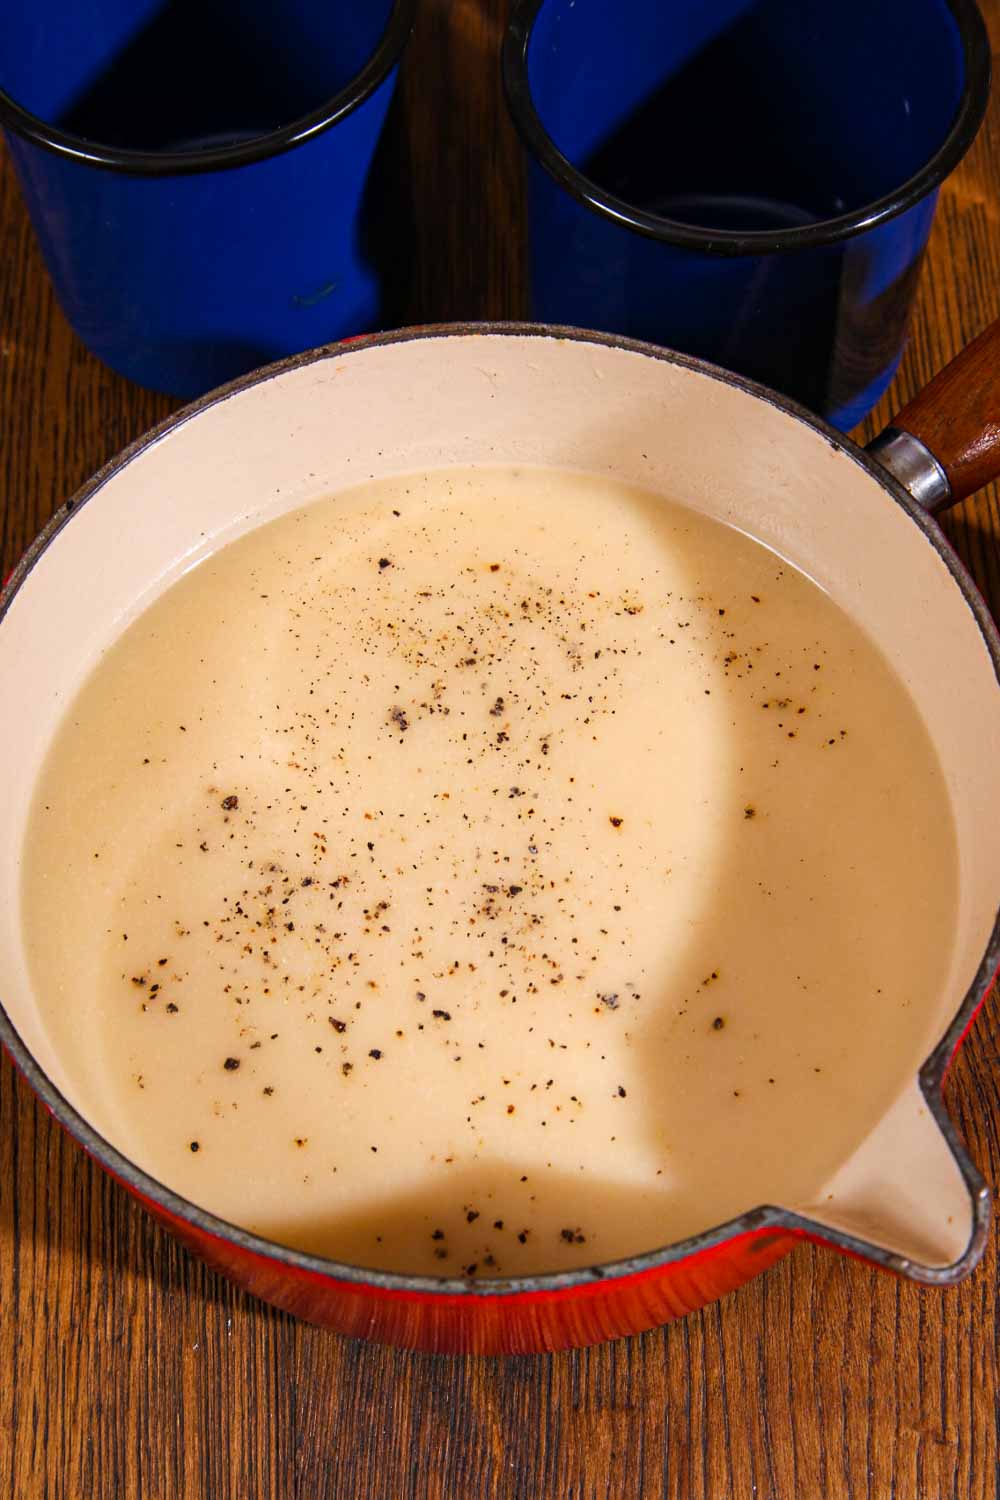 An enamel pan full of onion soup. The soup has ground pepper on top and the light is casting a shadow that creates a heart shape on the surface of the soup.